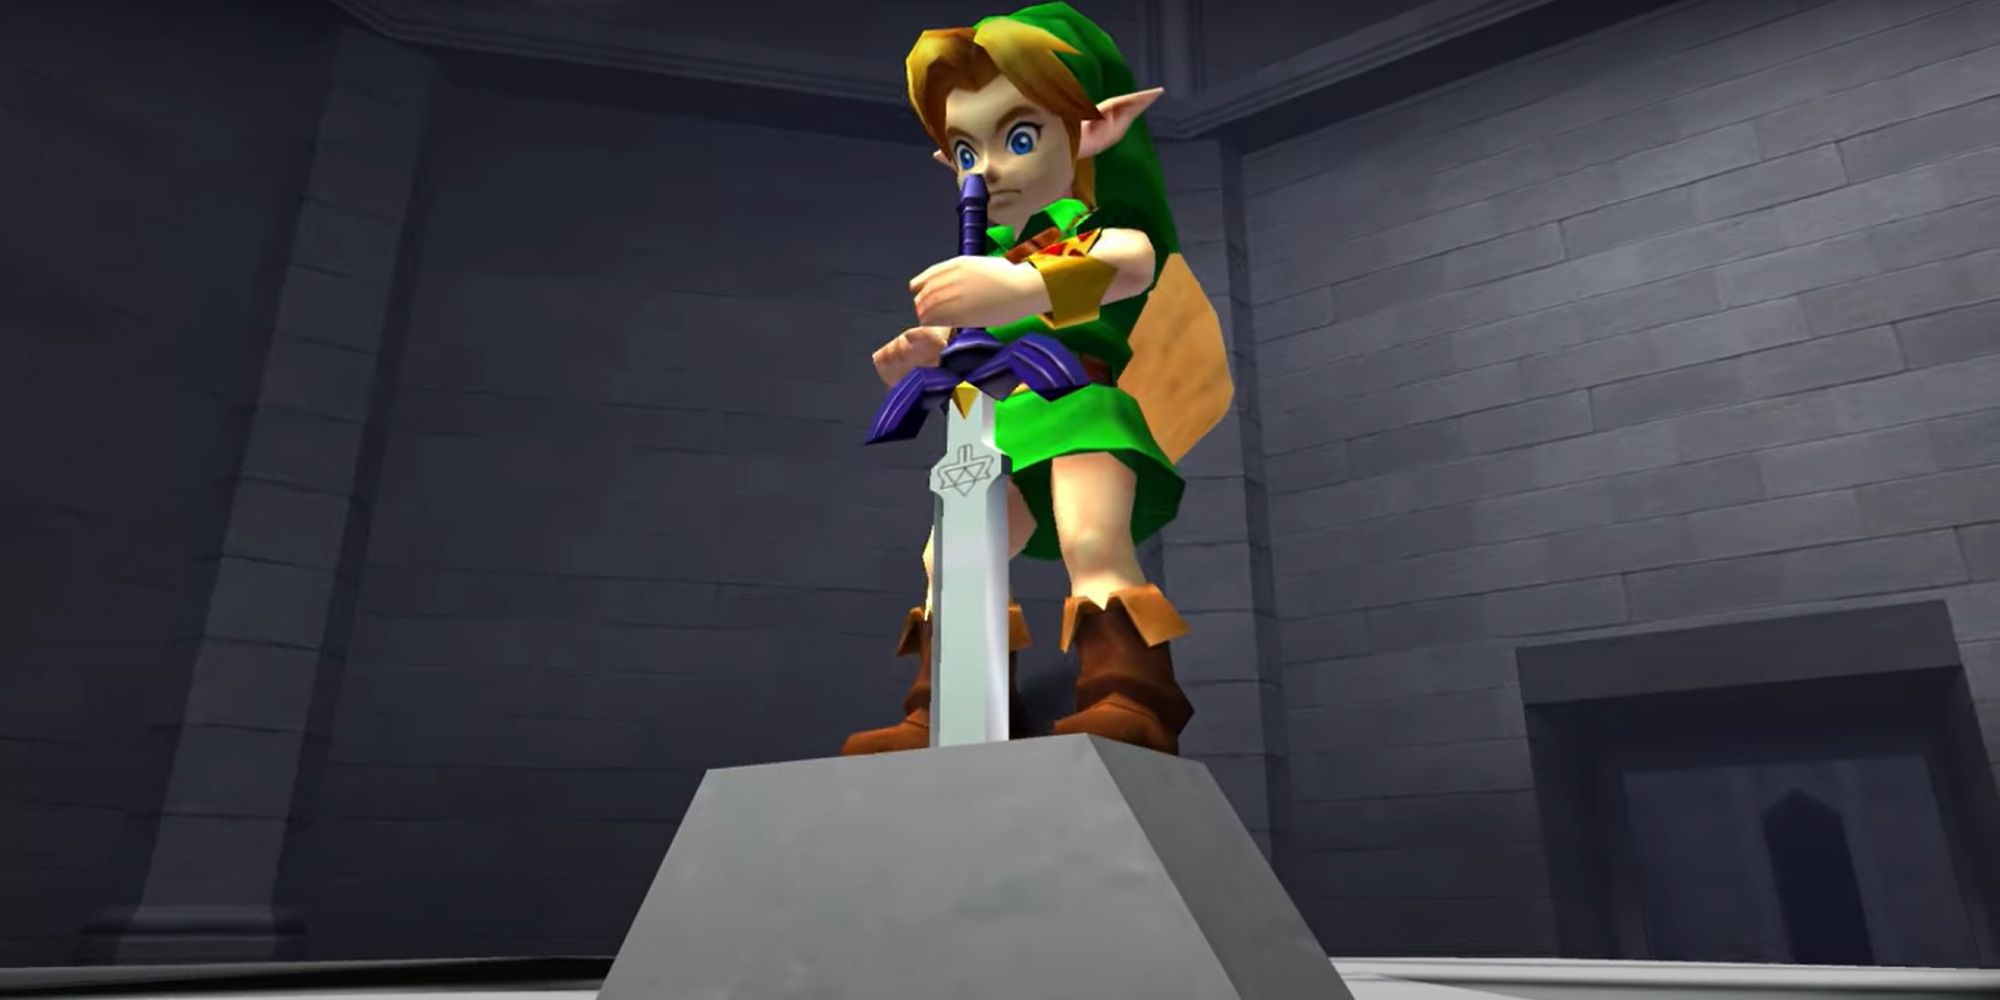 Ocarina of Time's Child Link Pulling Out the Master Sword in the Temple of Time